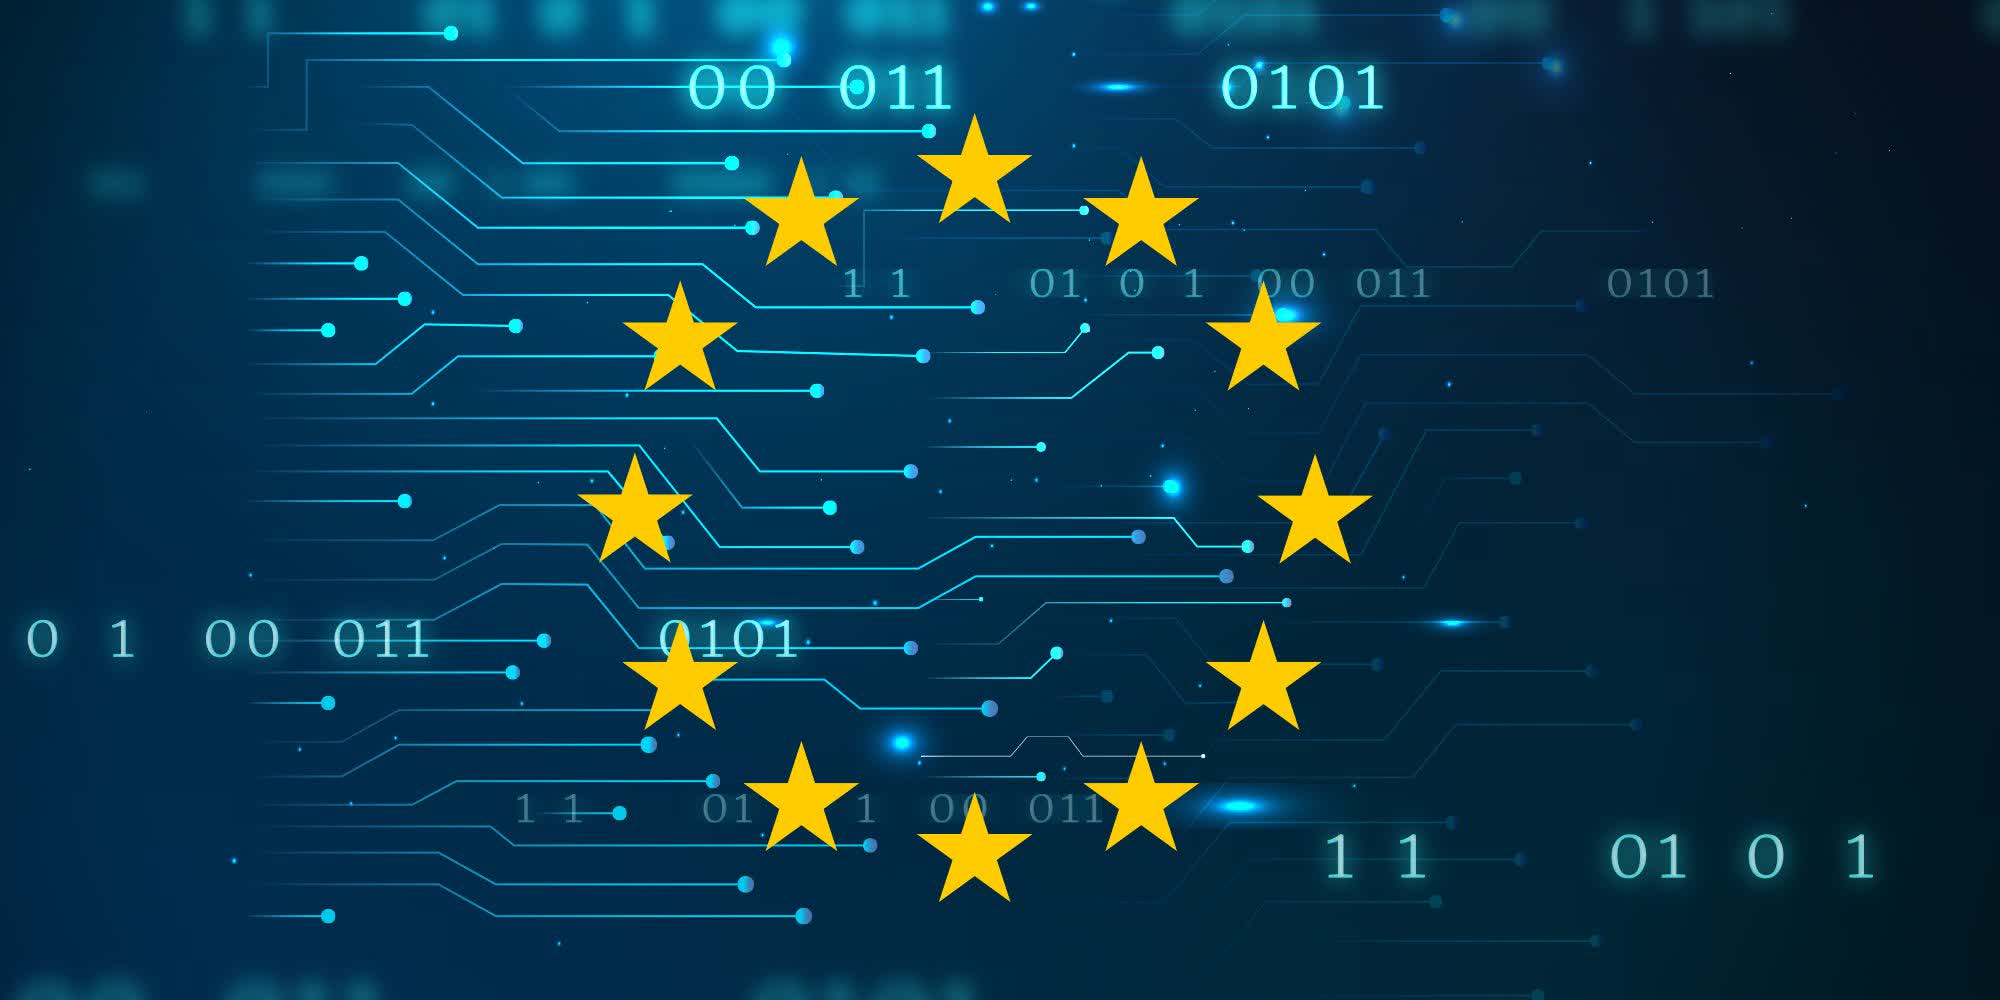 ECAT is Europe's new initiative to investigate the black box of online algorithms